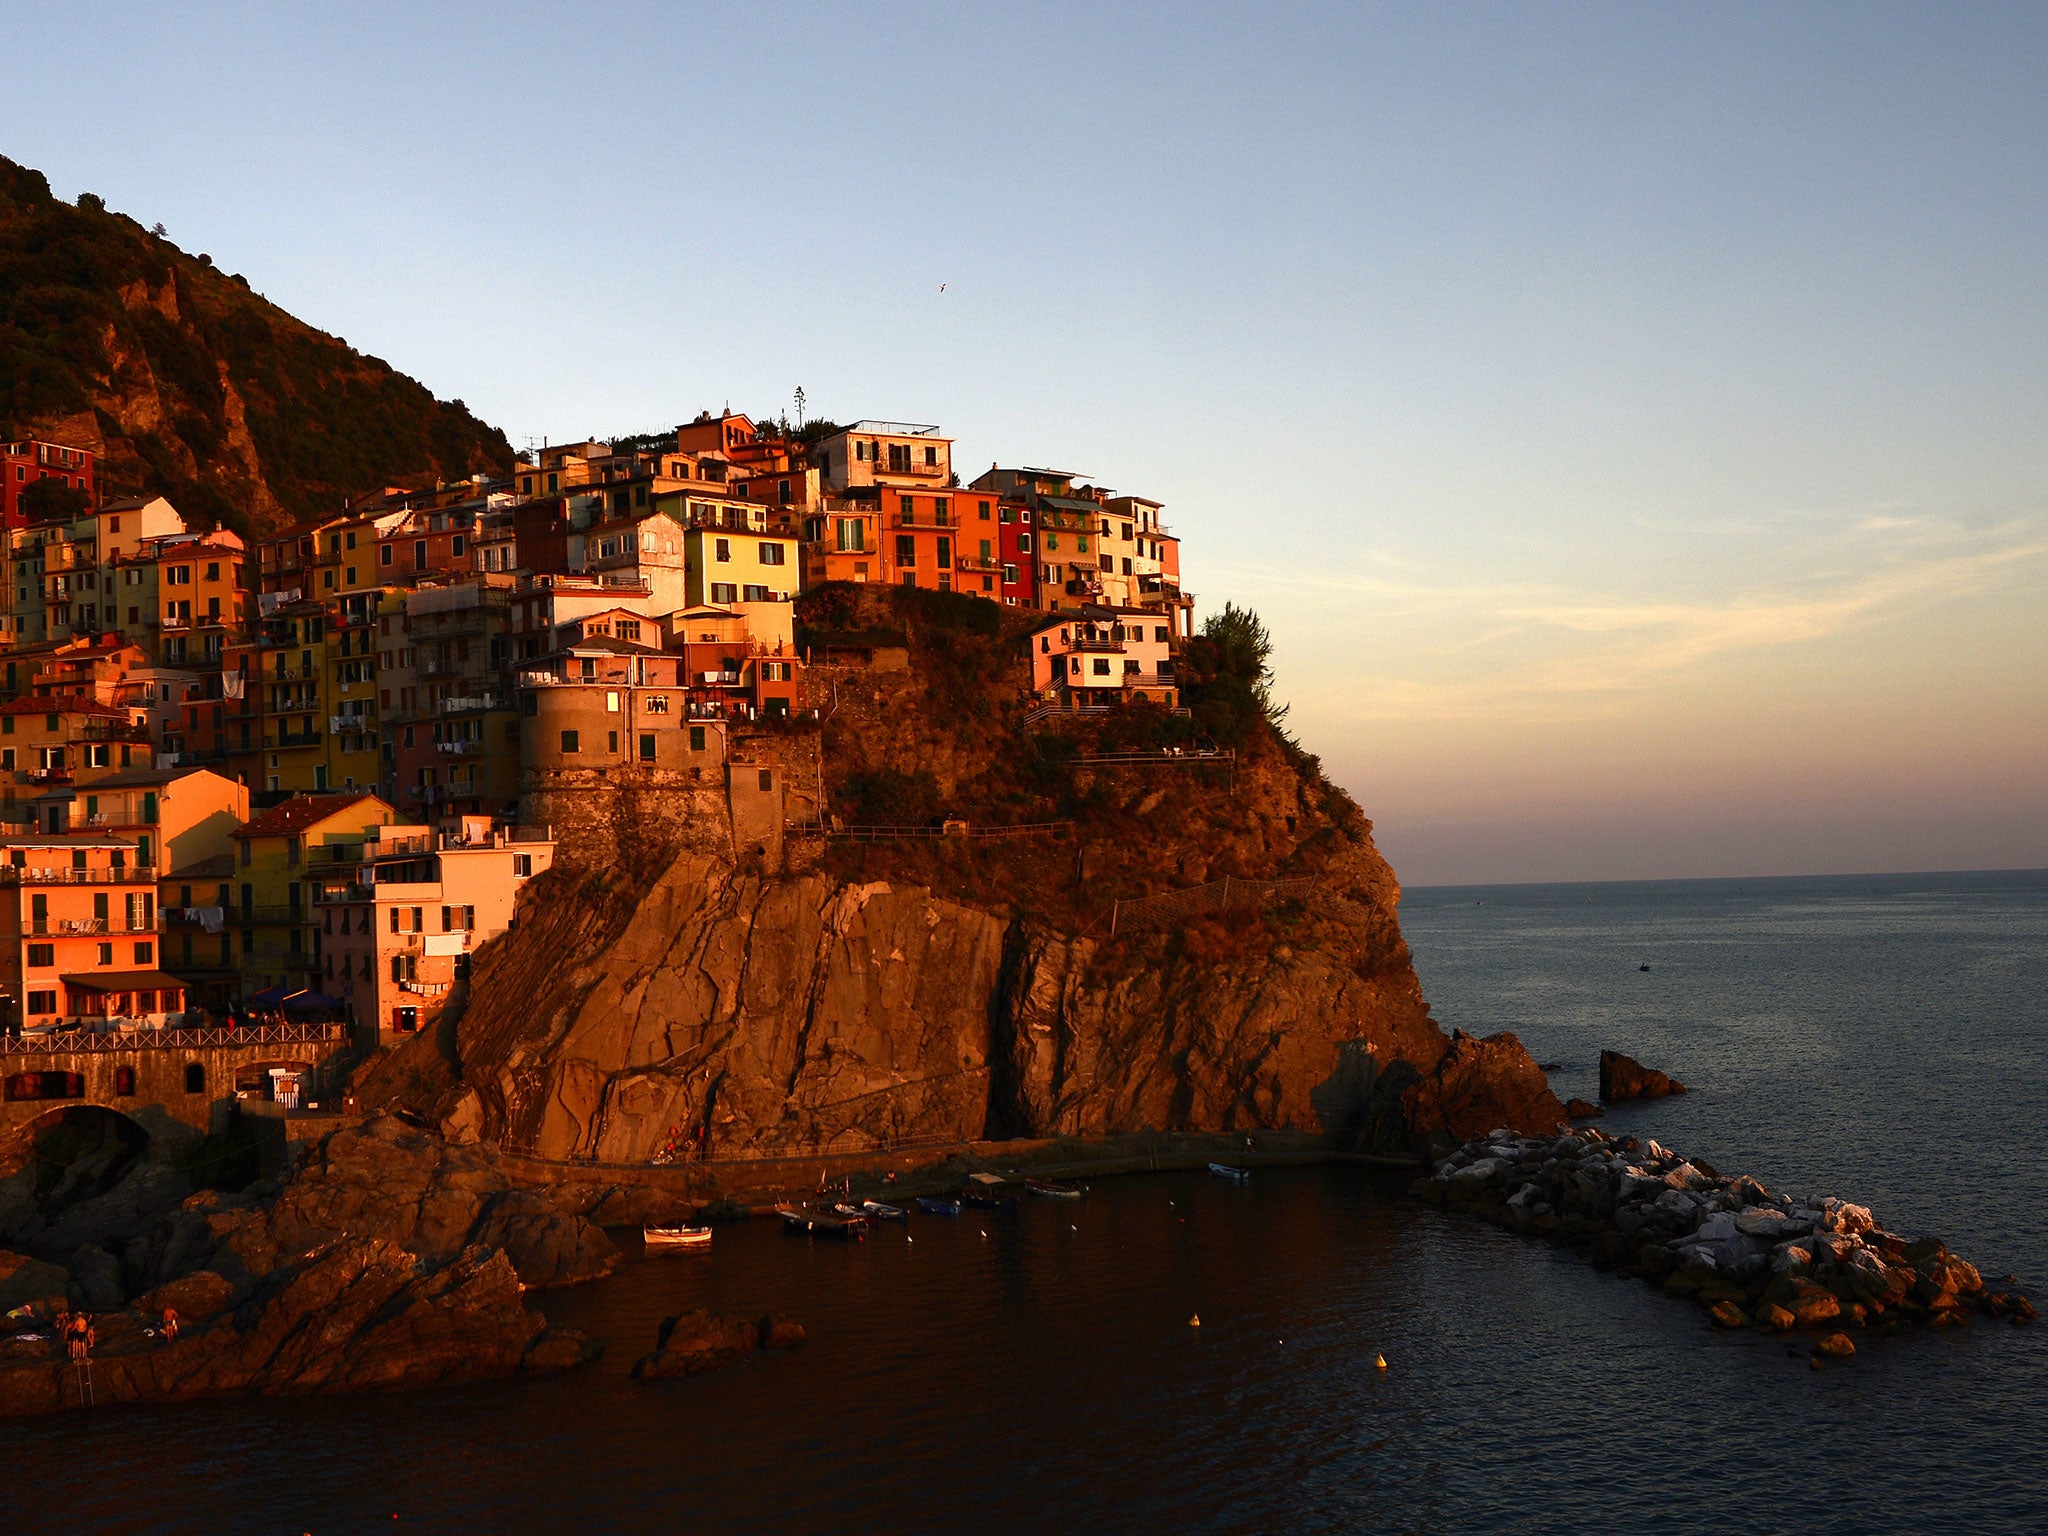 Cinque Terre is a favourite spot with tourists